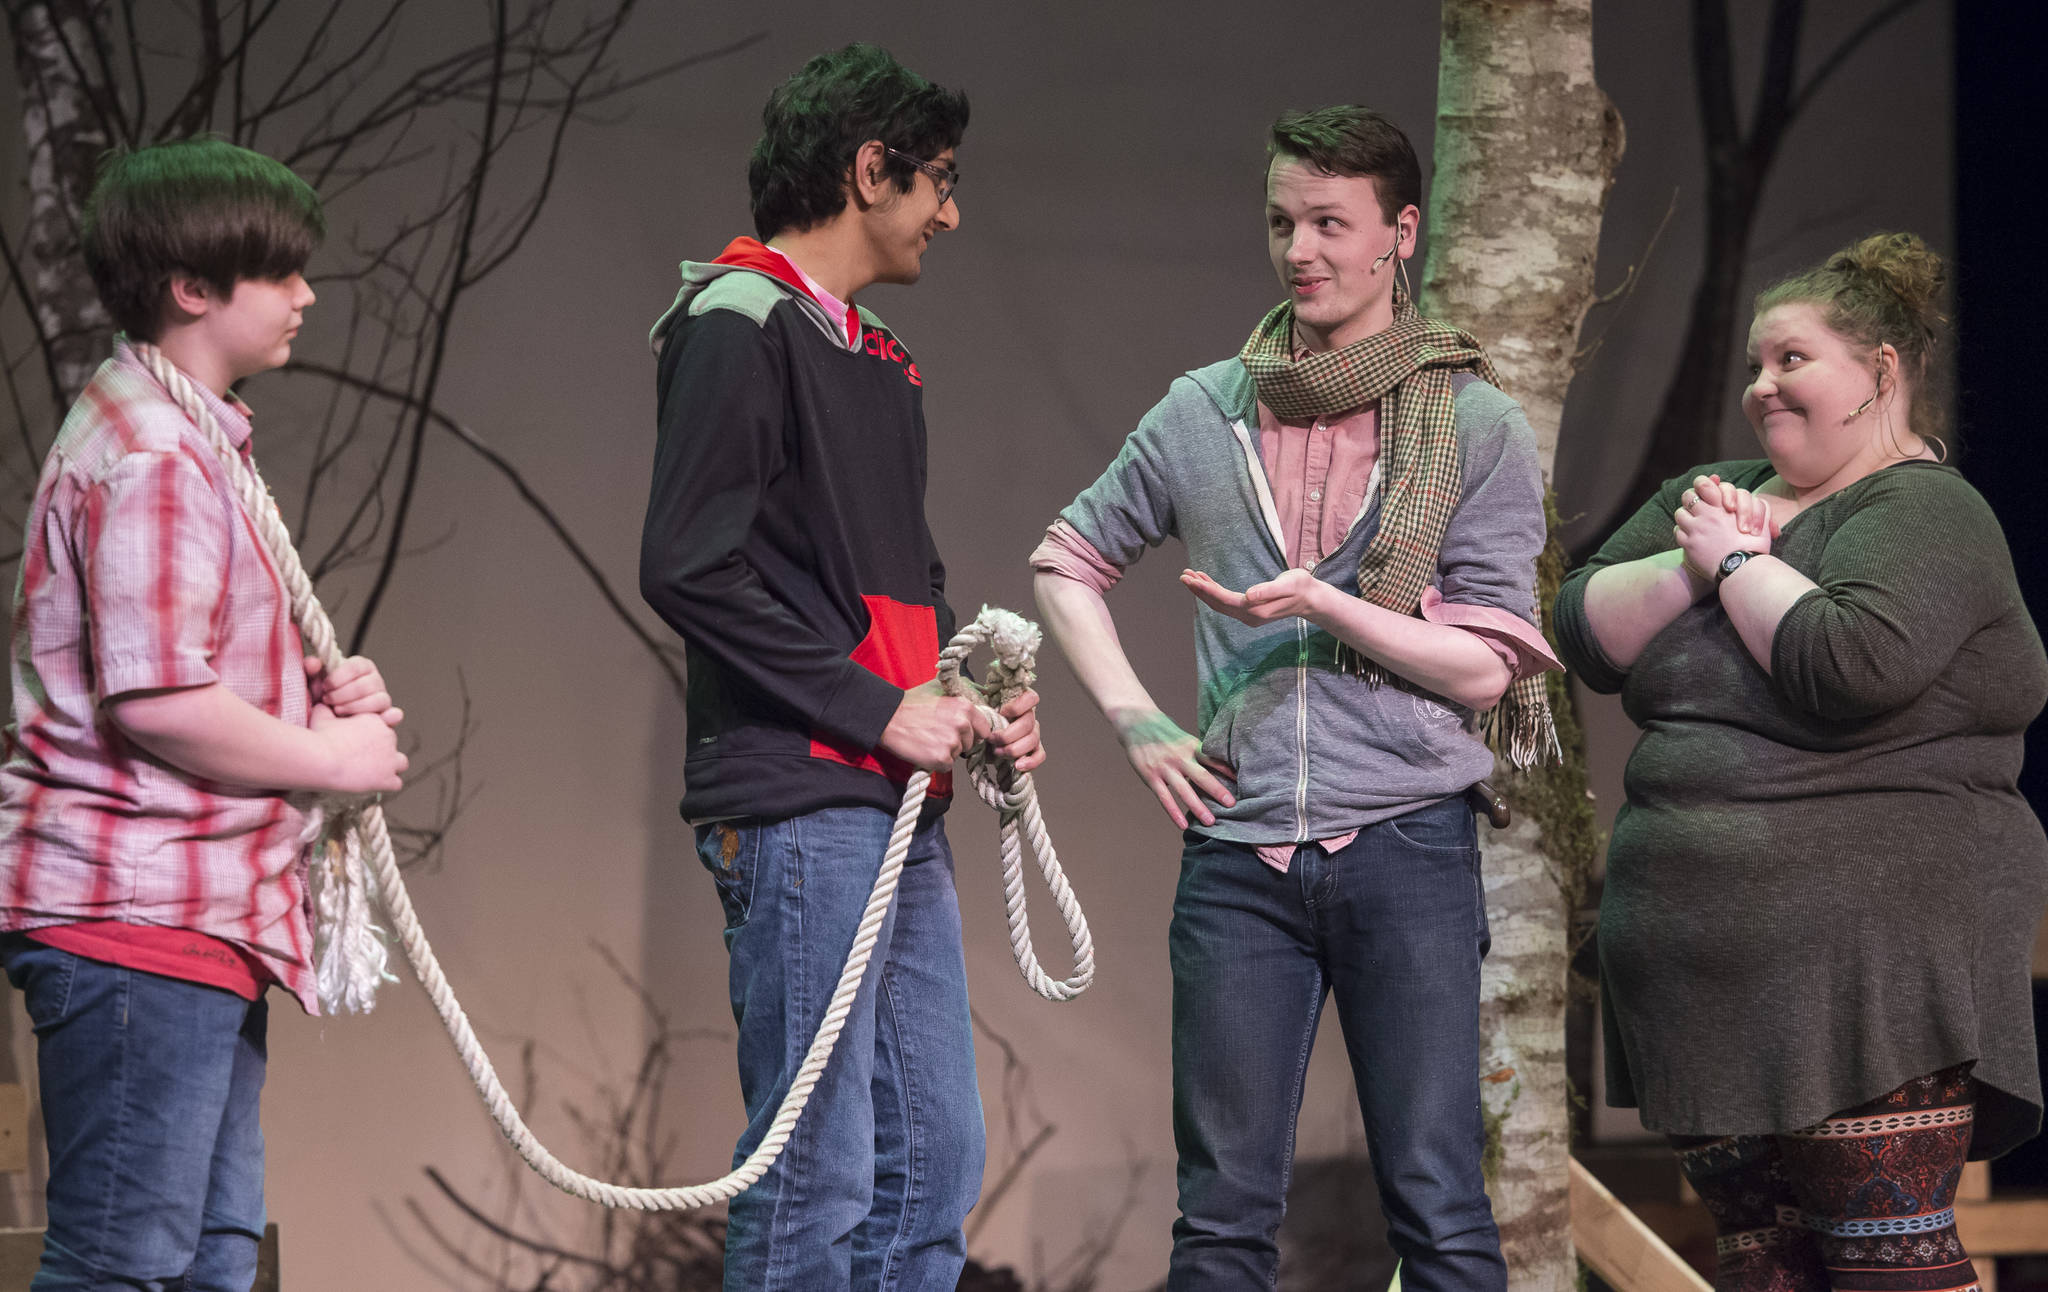 The Baker and His Wife, played by Zebadiah Bodine and Aria Moore, right, bargain with Jack, played by Sahil Bathija, second from left, to by his cow, played by Toby Russell, during rehearsal of Juneau-Douglas High School’s production of “Into the Woods” at JDHS on Wednesday, Jan. 31, 2018.